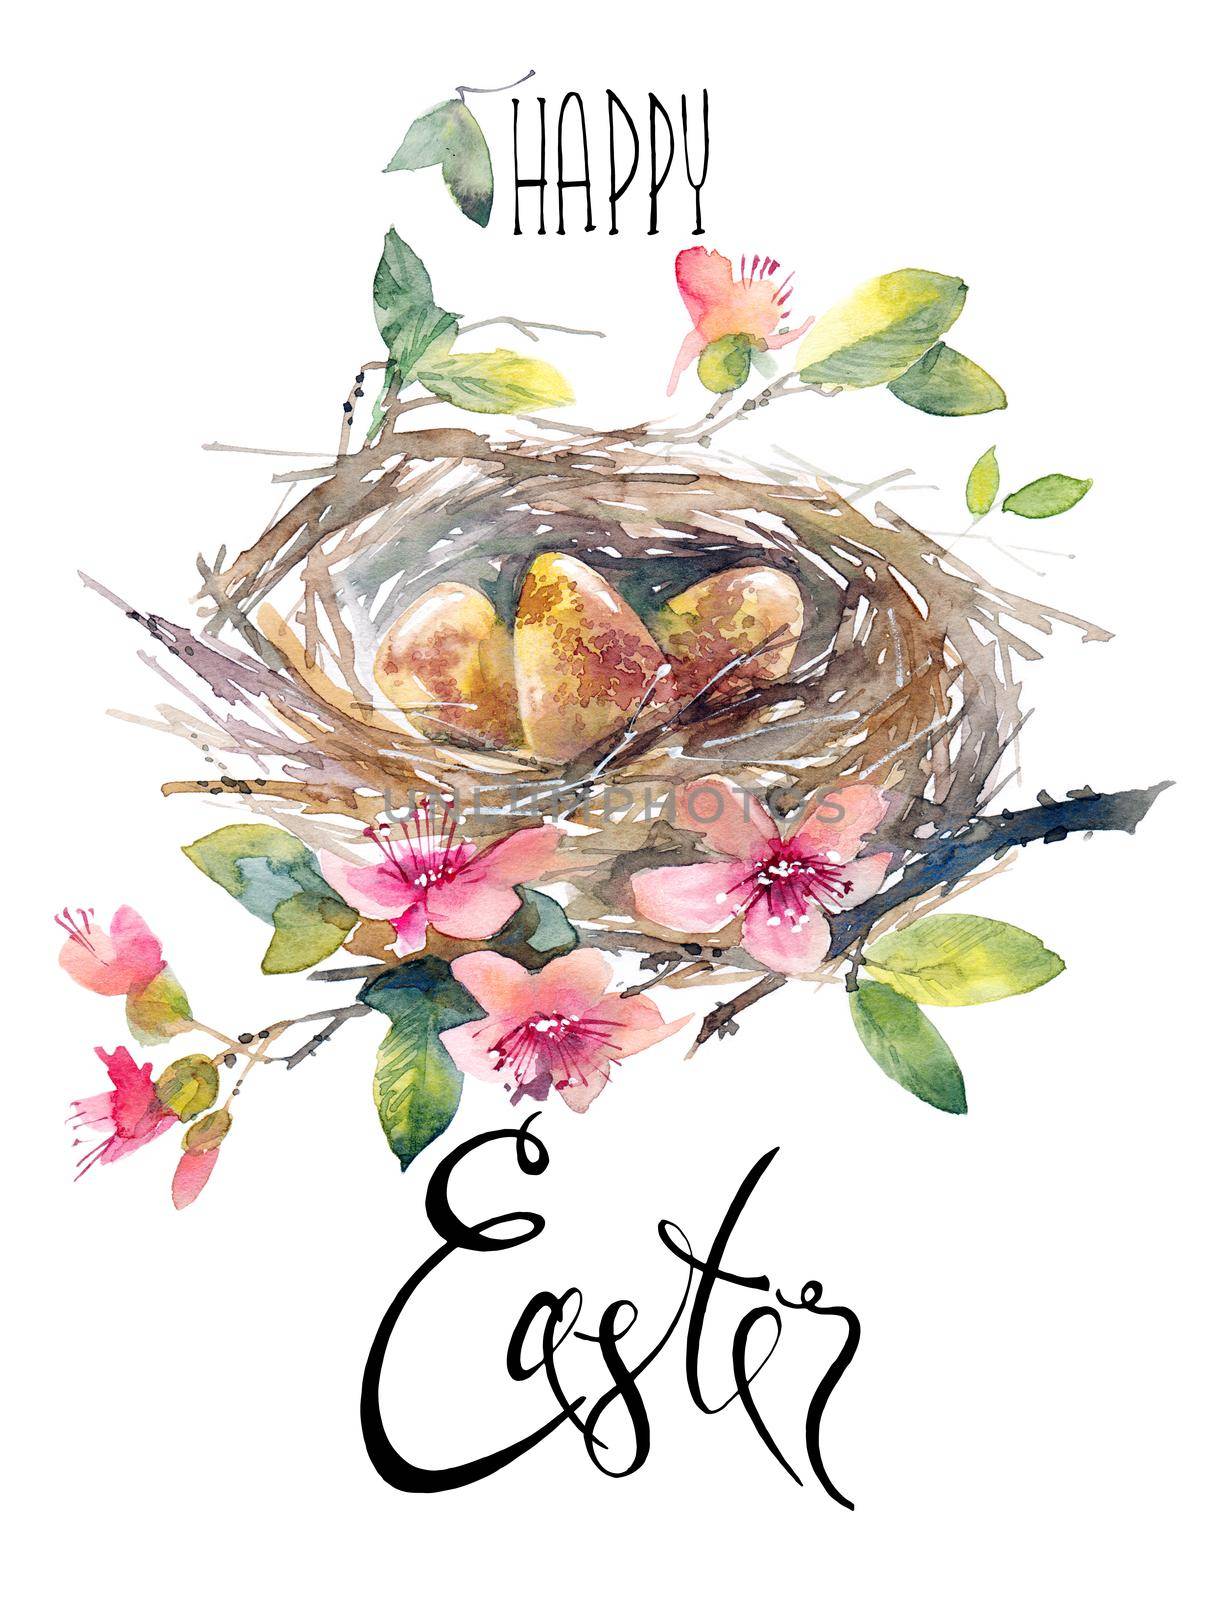 Watercolor greeting card for Easter day - bird nest with eggs, flowers and calligraphy lettering